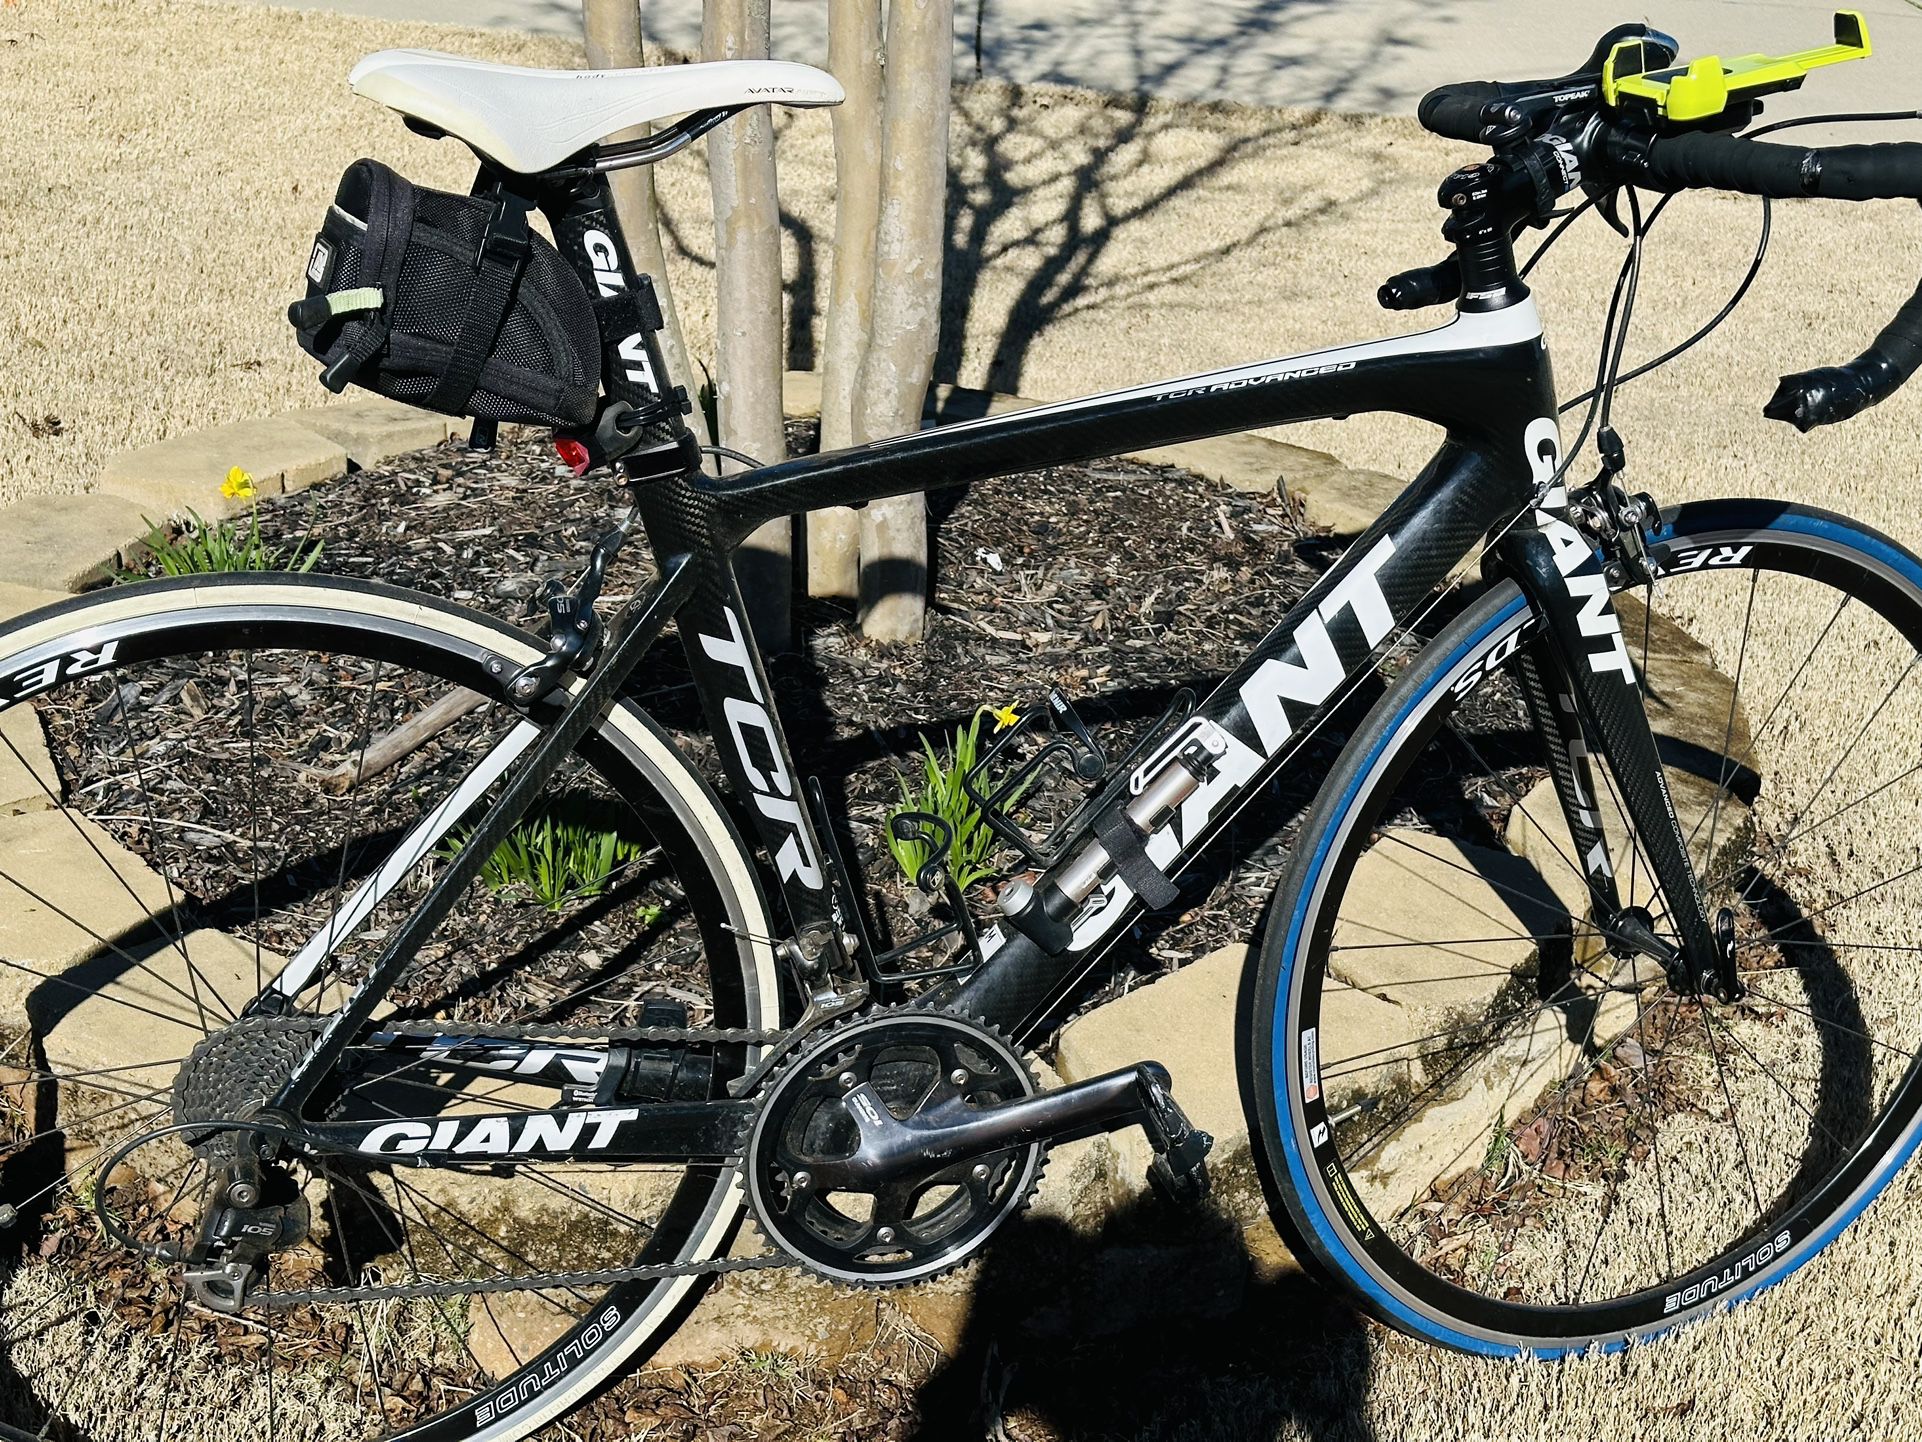 2013 used Medium Giant TCR Advanced road bike, suitable for riders between 5’7”-5’11”